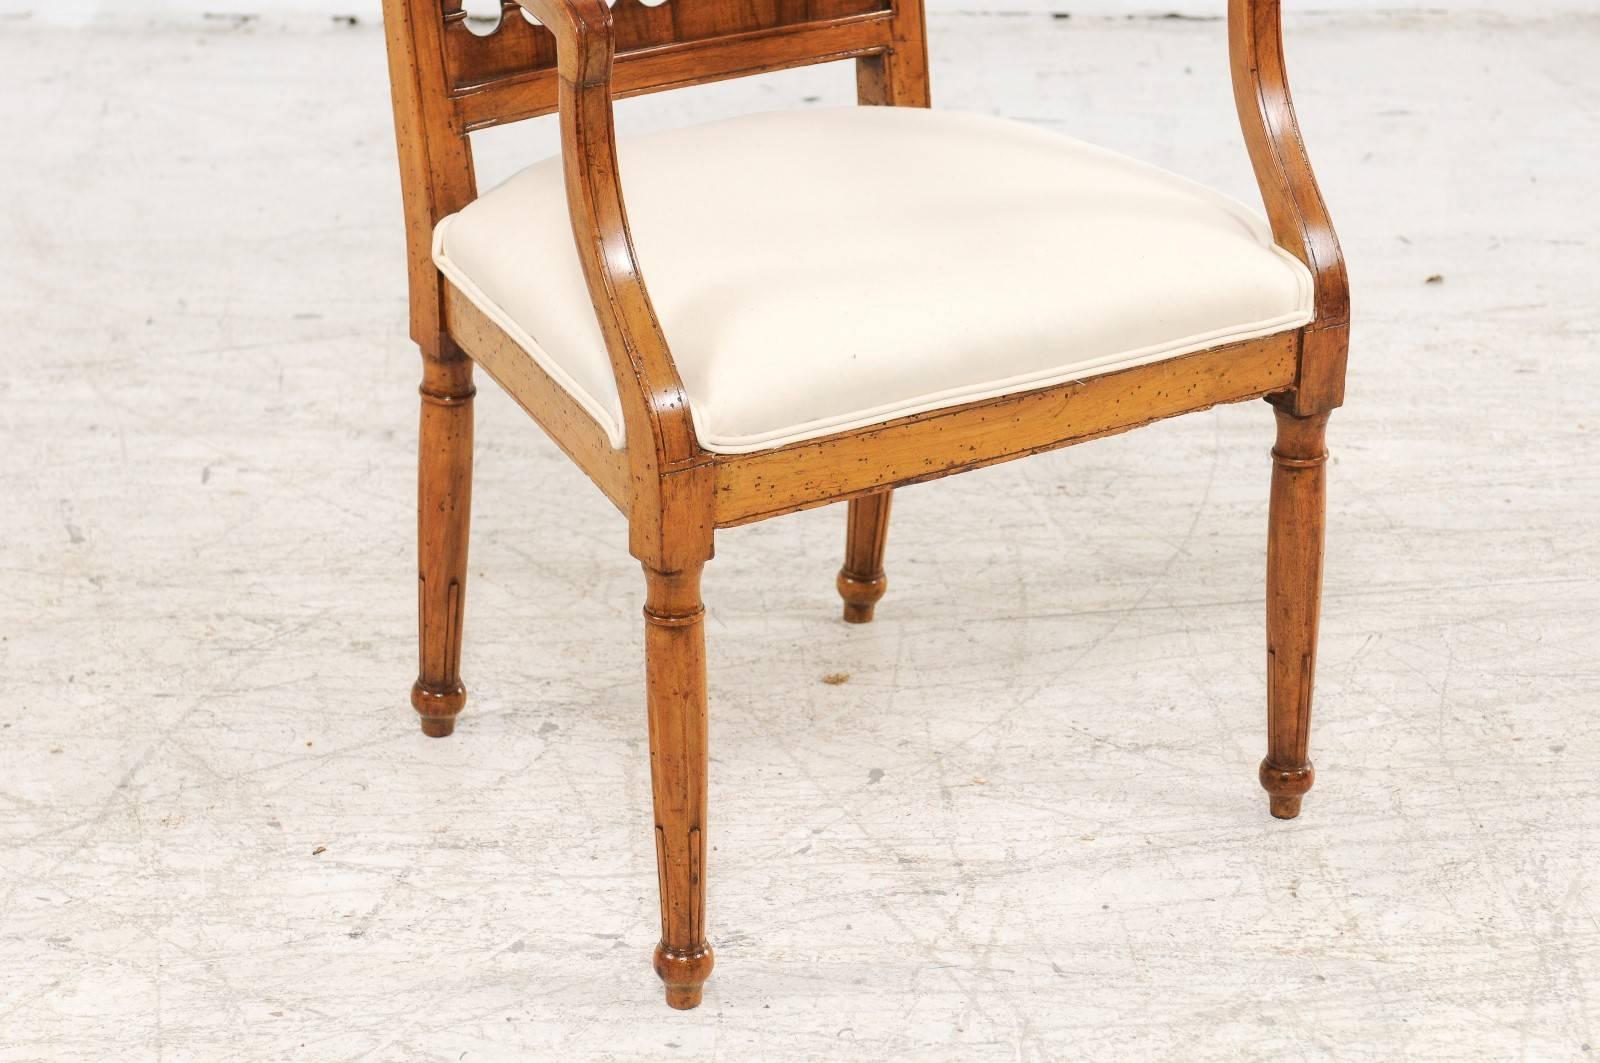 20th Century Set of Four Italian Vintage Upholstered Chairs with Latticed Backs, circa 1930